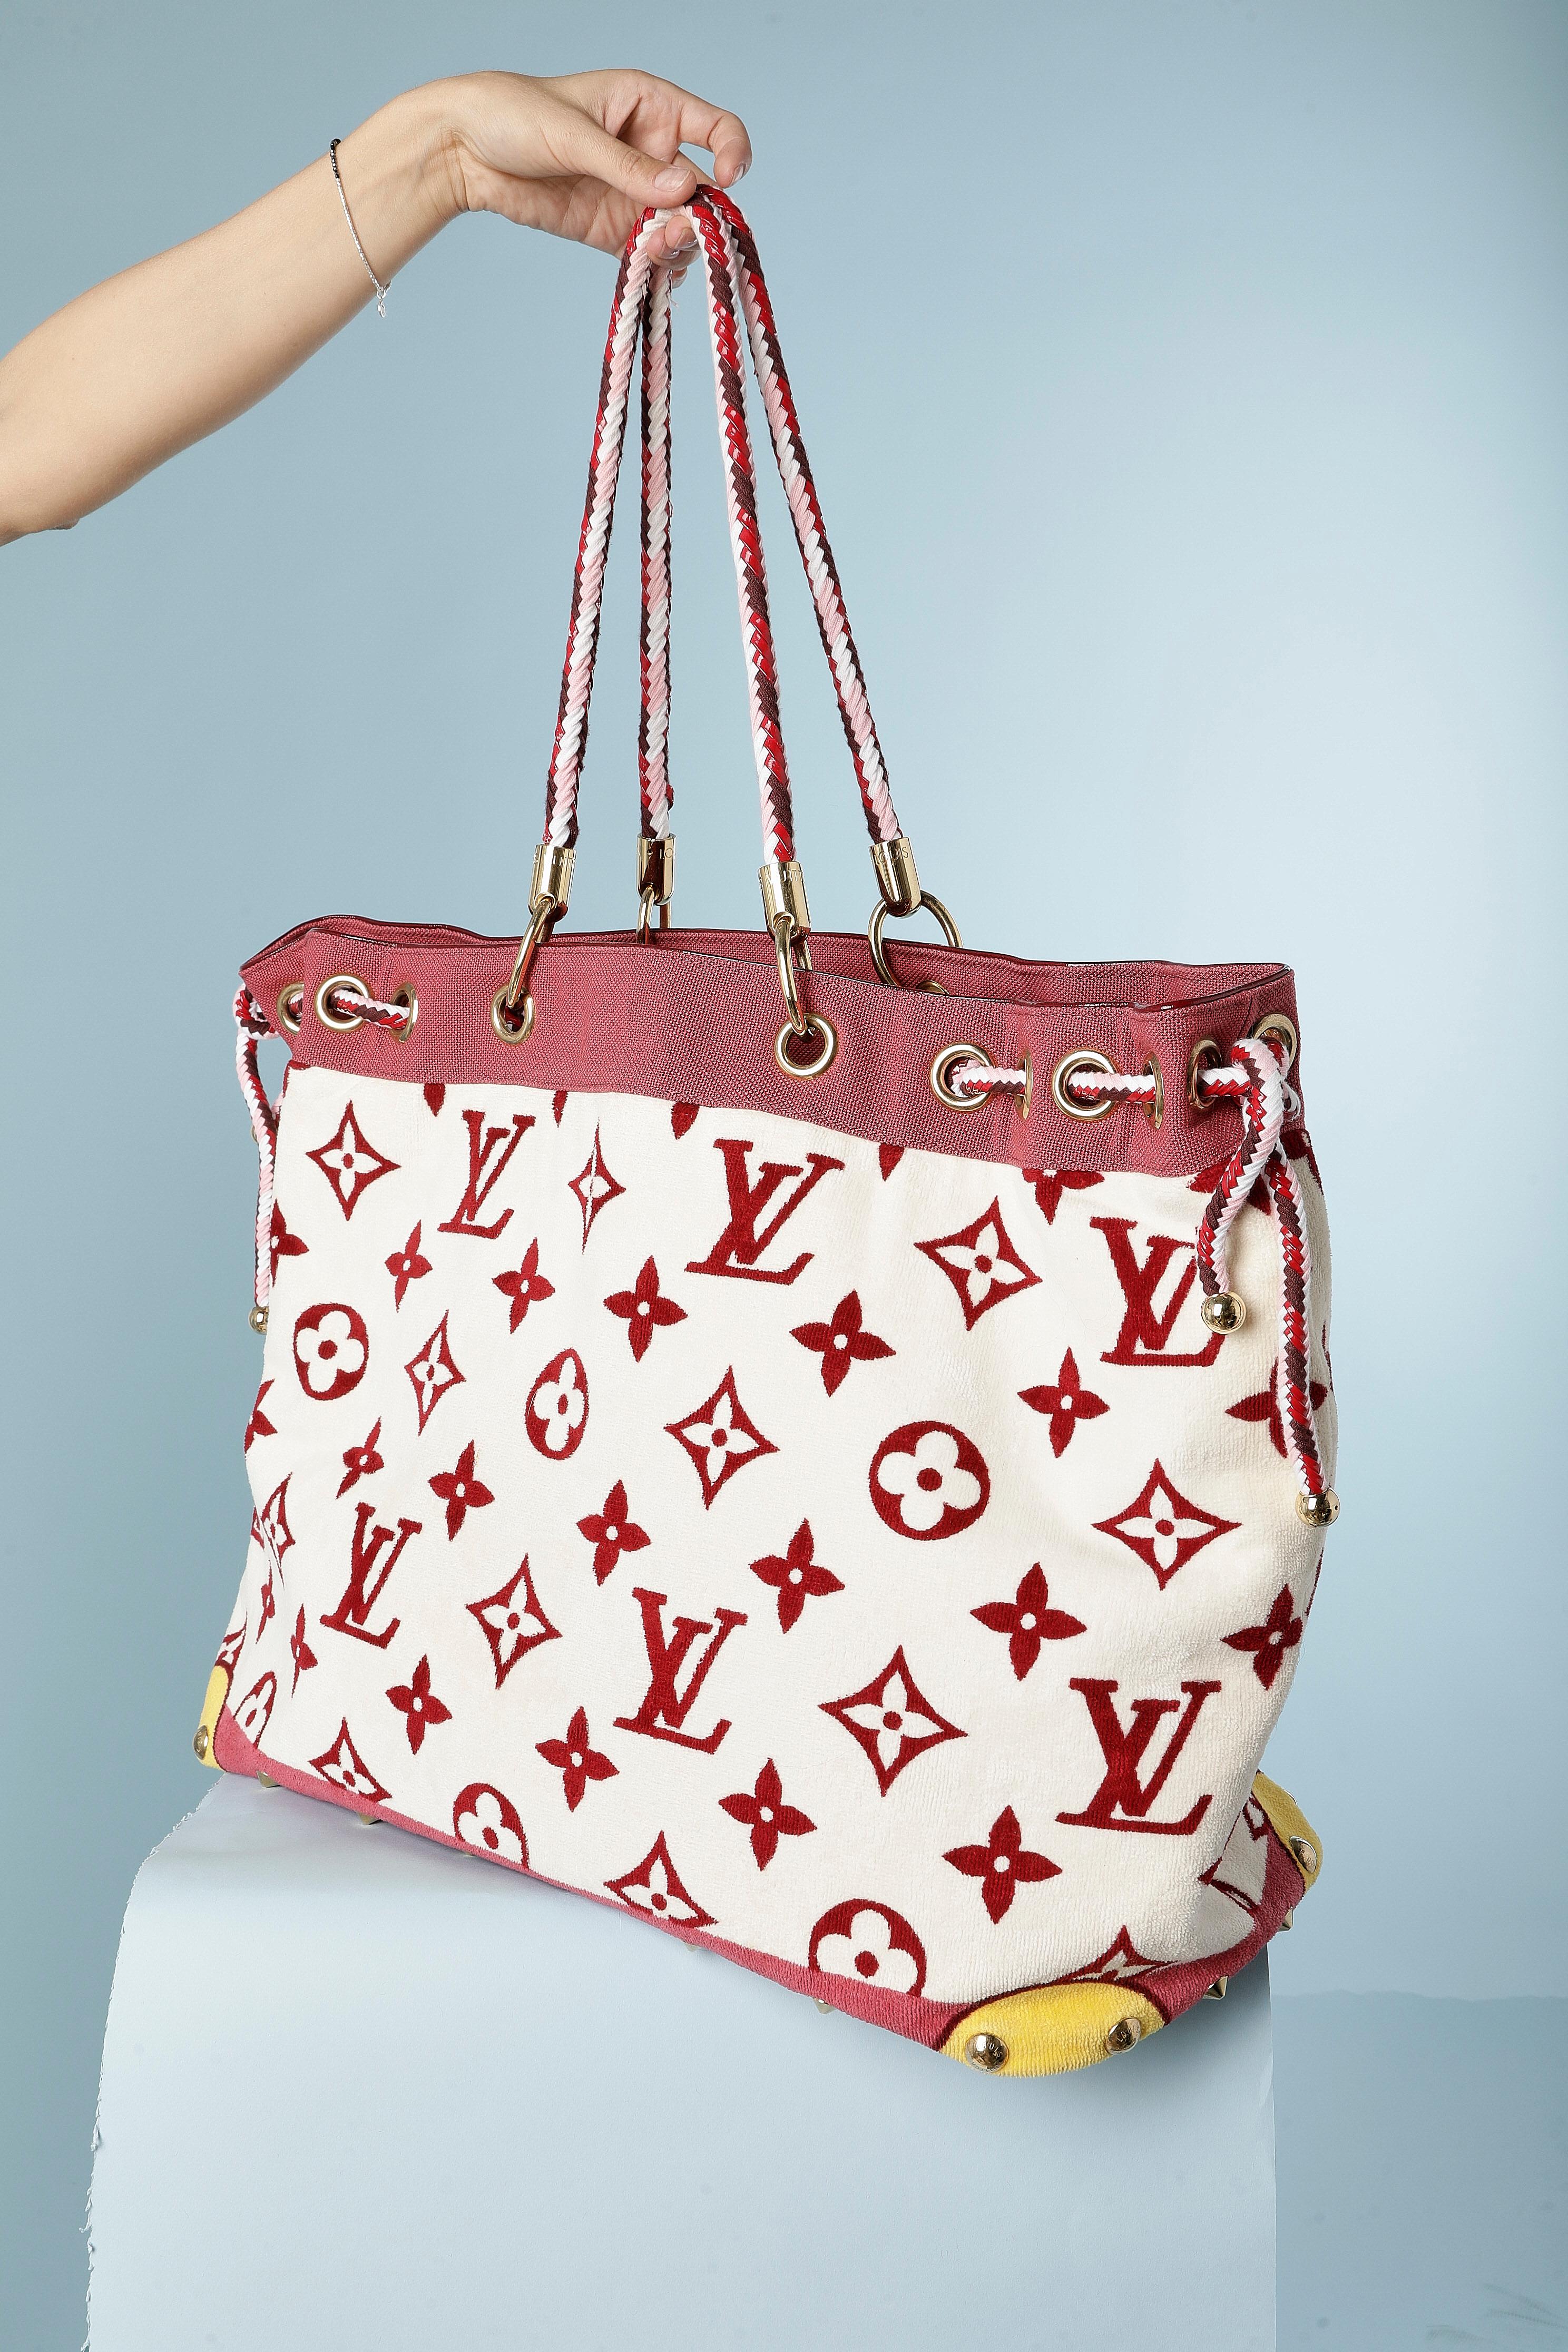 Oversize beach bag in towel fabric with printed monogram and gold branded studs.
Dustbag provided. Bag handle mix red plastic and pink/burgundy/ white coton threads.
One zip pocket inside.
SIZE 60 cm X 40cm X 20 cm 